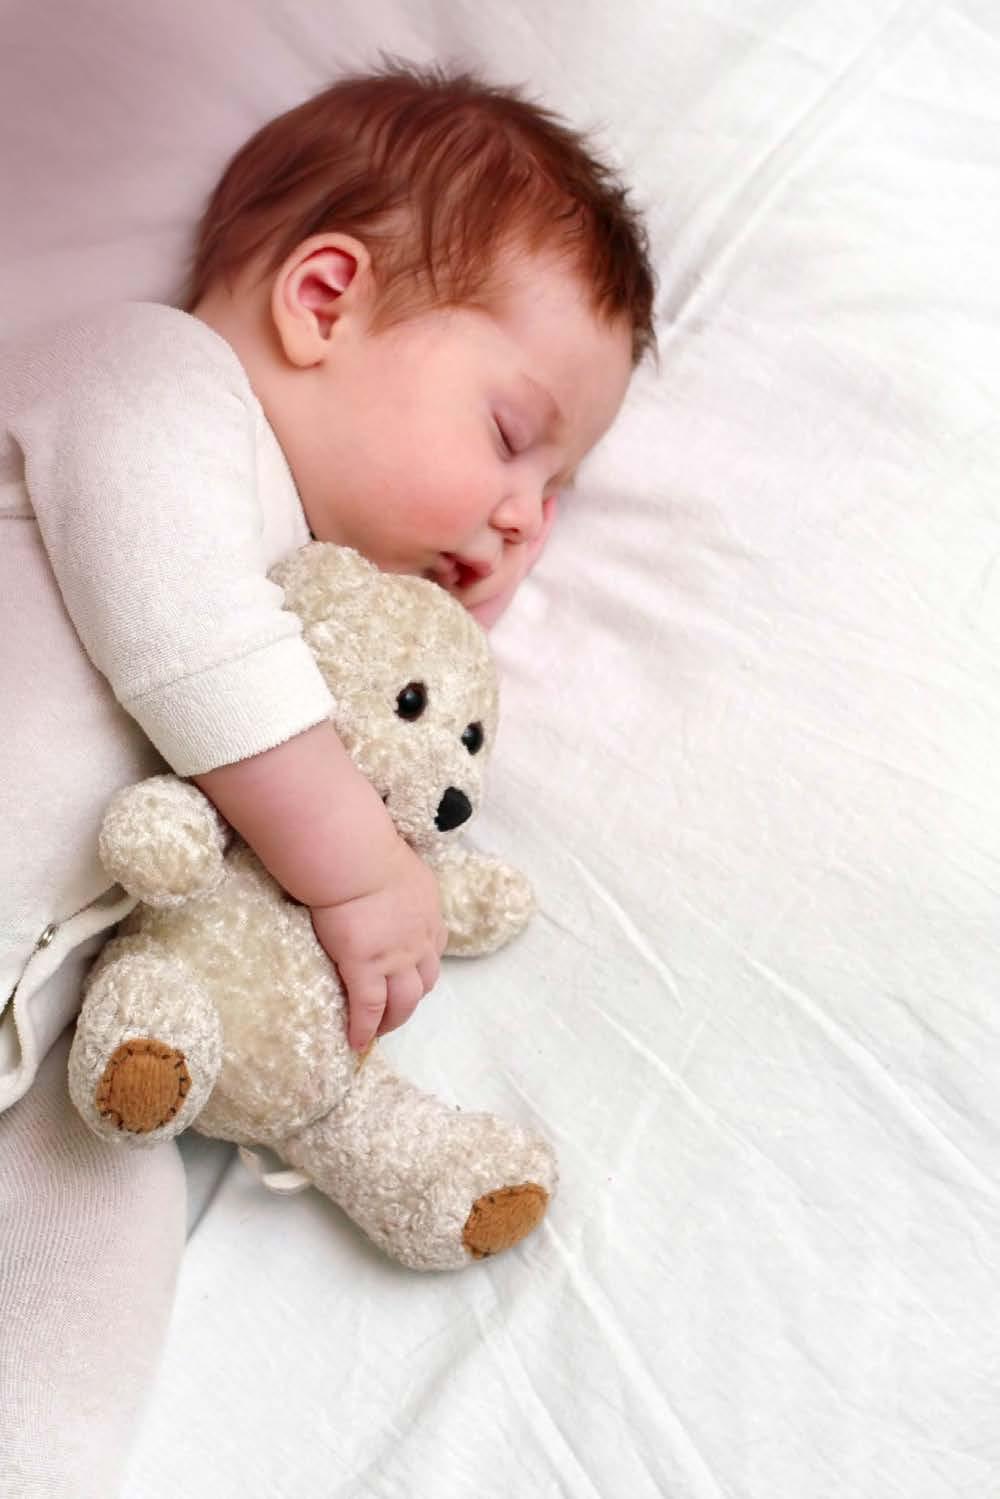 8 Sleep like a baby Feeling good about your security posture might just let you sleep at night.